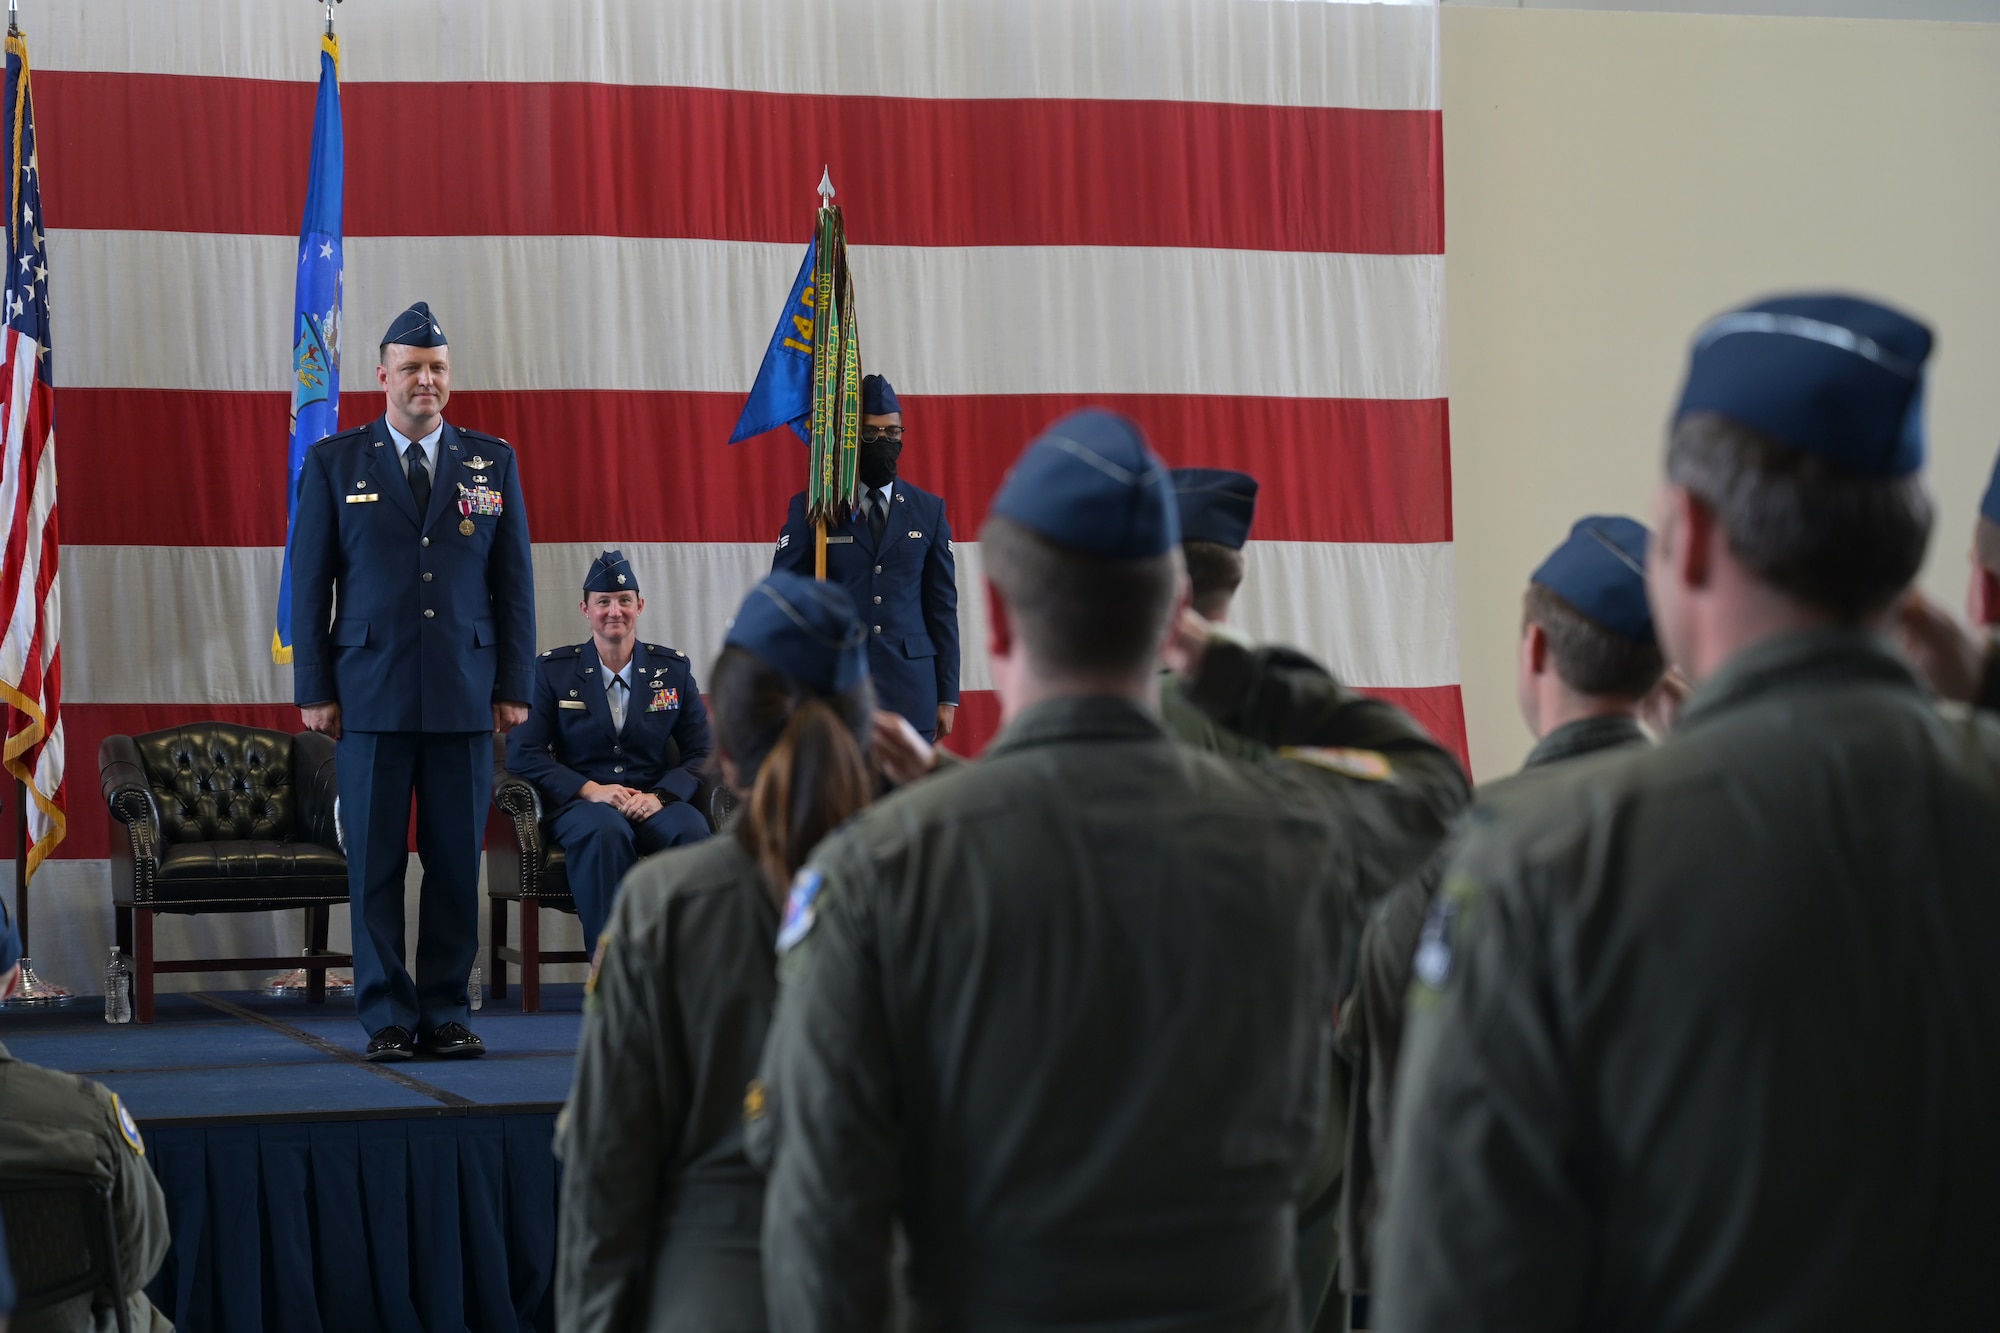 A formation comprised of Airmen from the 37th Flying Training Squadron salute Lt. Col. Aaron Tillman, outgoing 37th FTS commander during a change of command ceremony May 27, 2021, on Columbus Air Force Base, Miss. The T-6A Texan II is a single-engine, two-seat primary trainer designed to train Joint Primary Pilot Training, or JPPT, students in basic flying skills common to U.S. Air Force and Navy pilots. (U.S. Air Force photo by Senior Airman Jake Jacobsen)